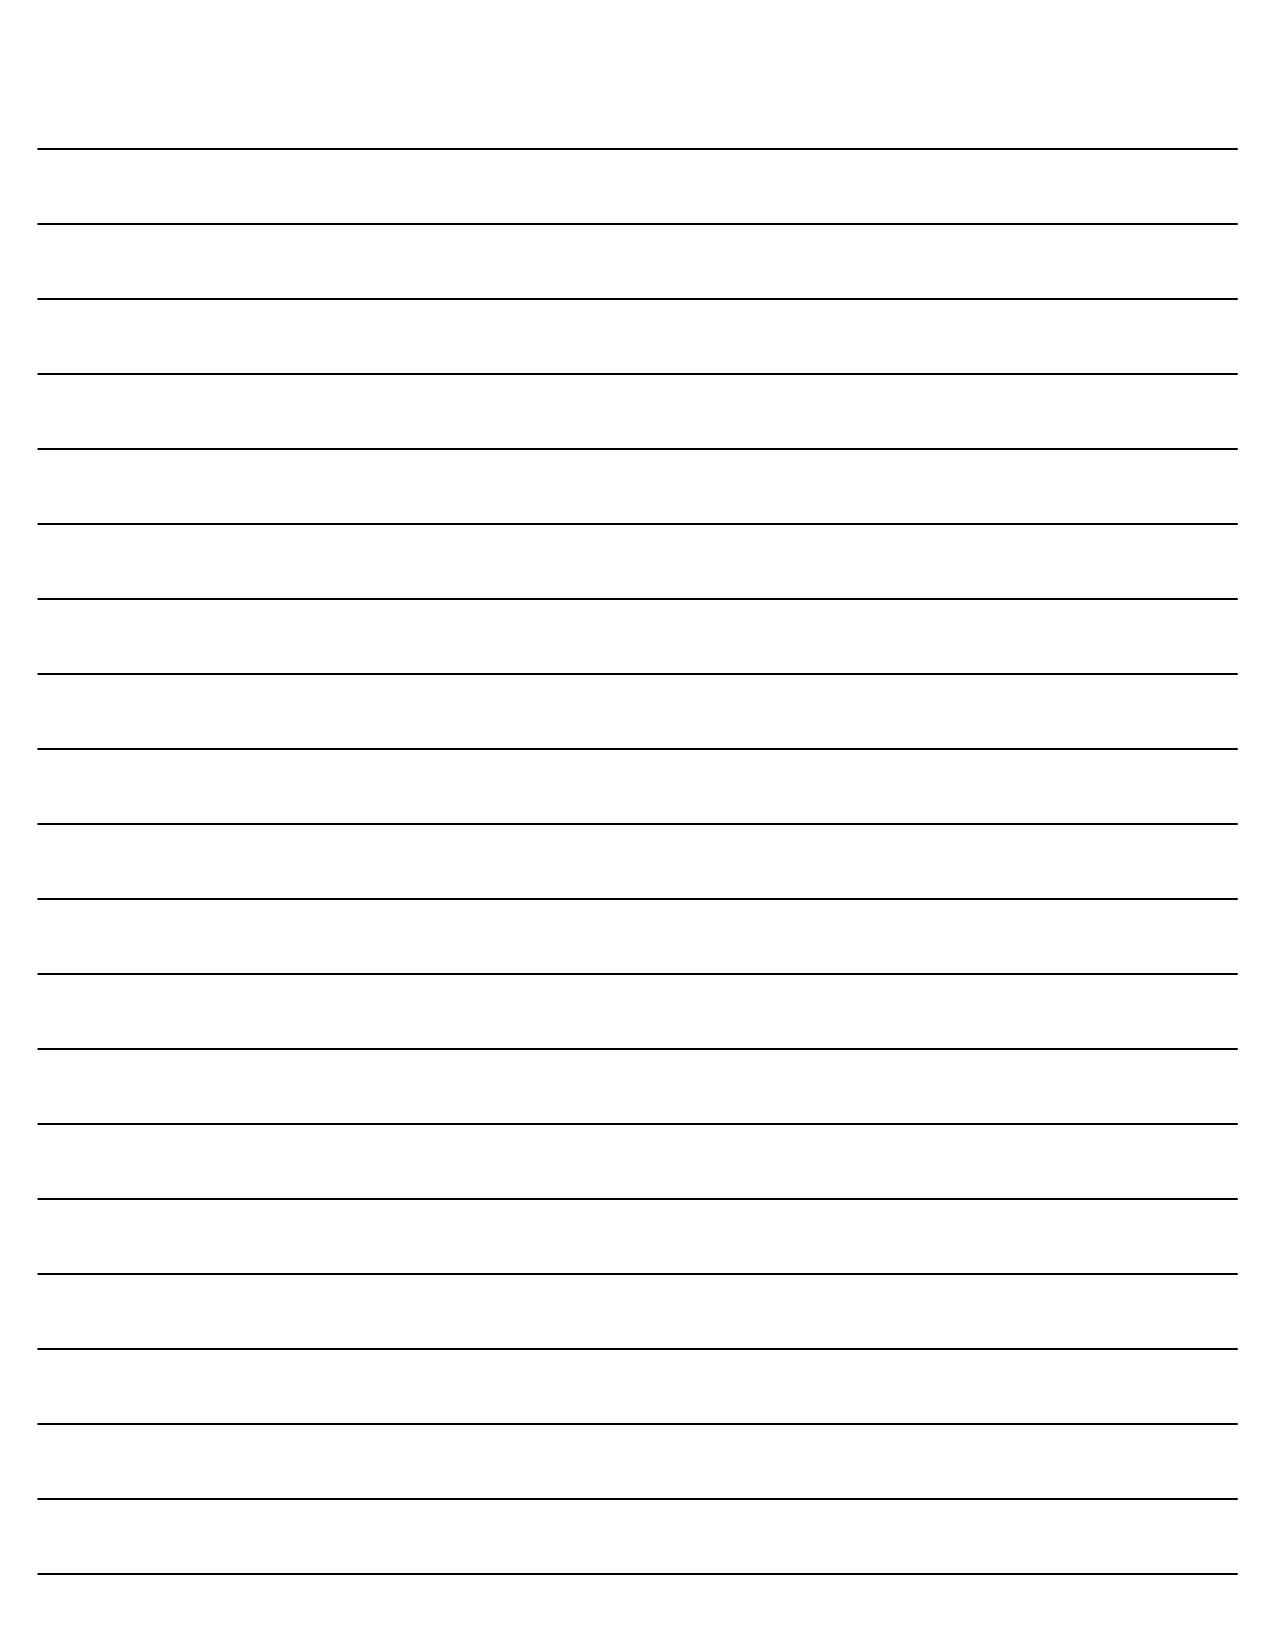 Free Printable Lined Writing Paper Journal